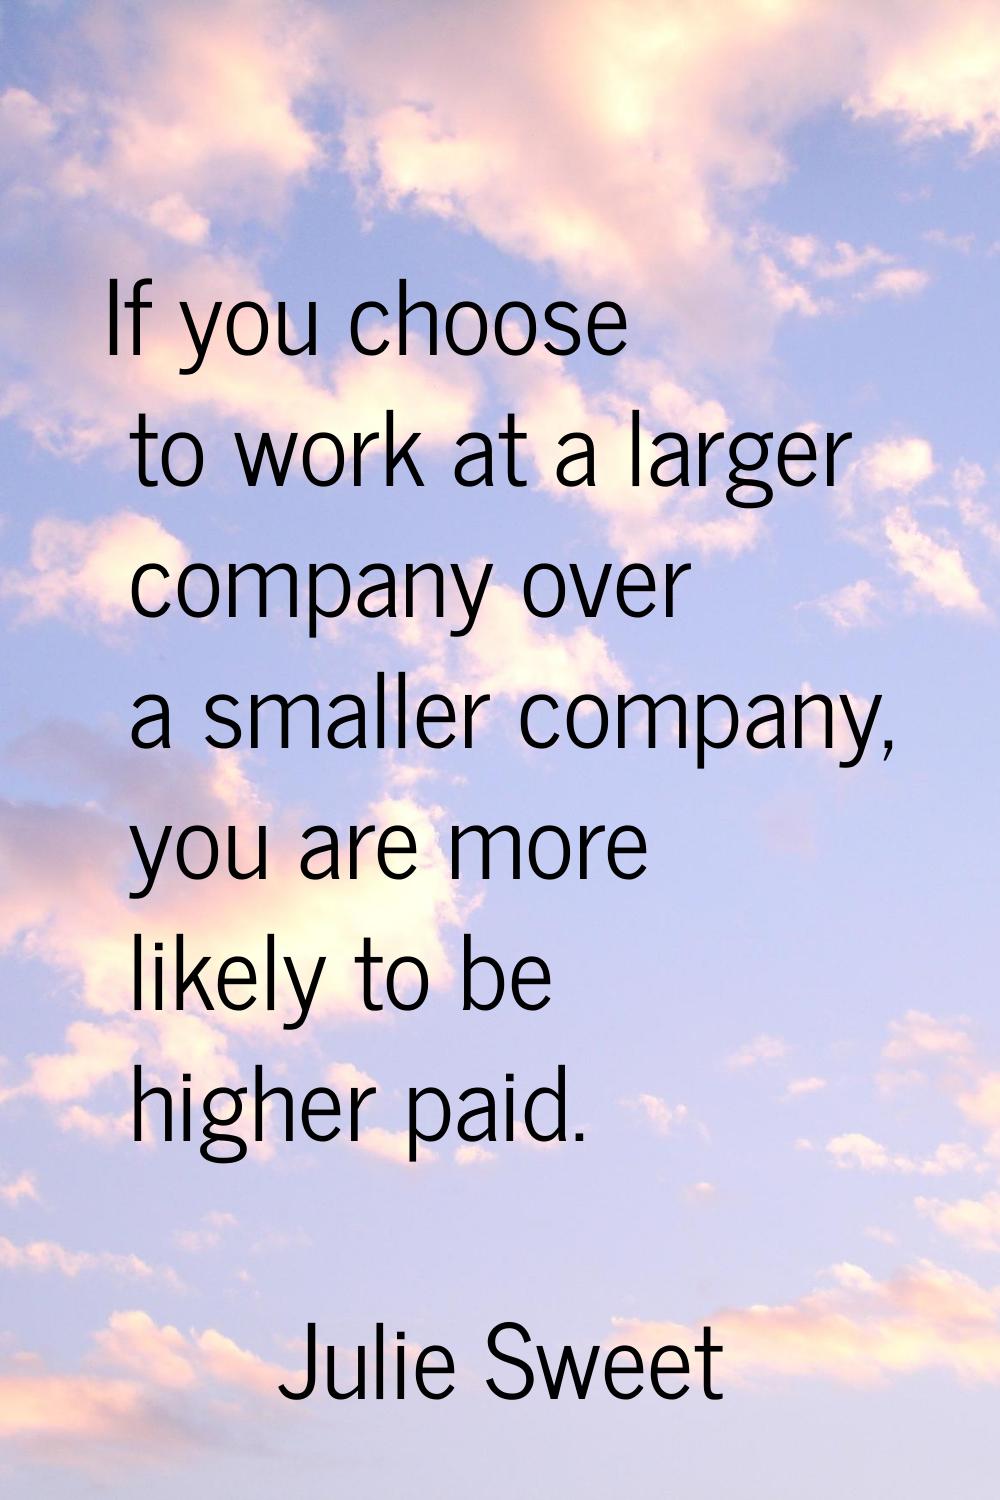 If you choose to work at a larger company over a smaller company, you are more likely to be higher 